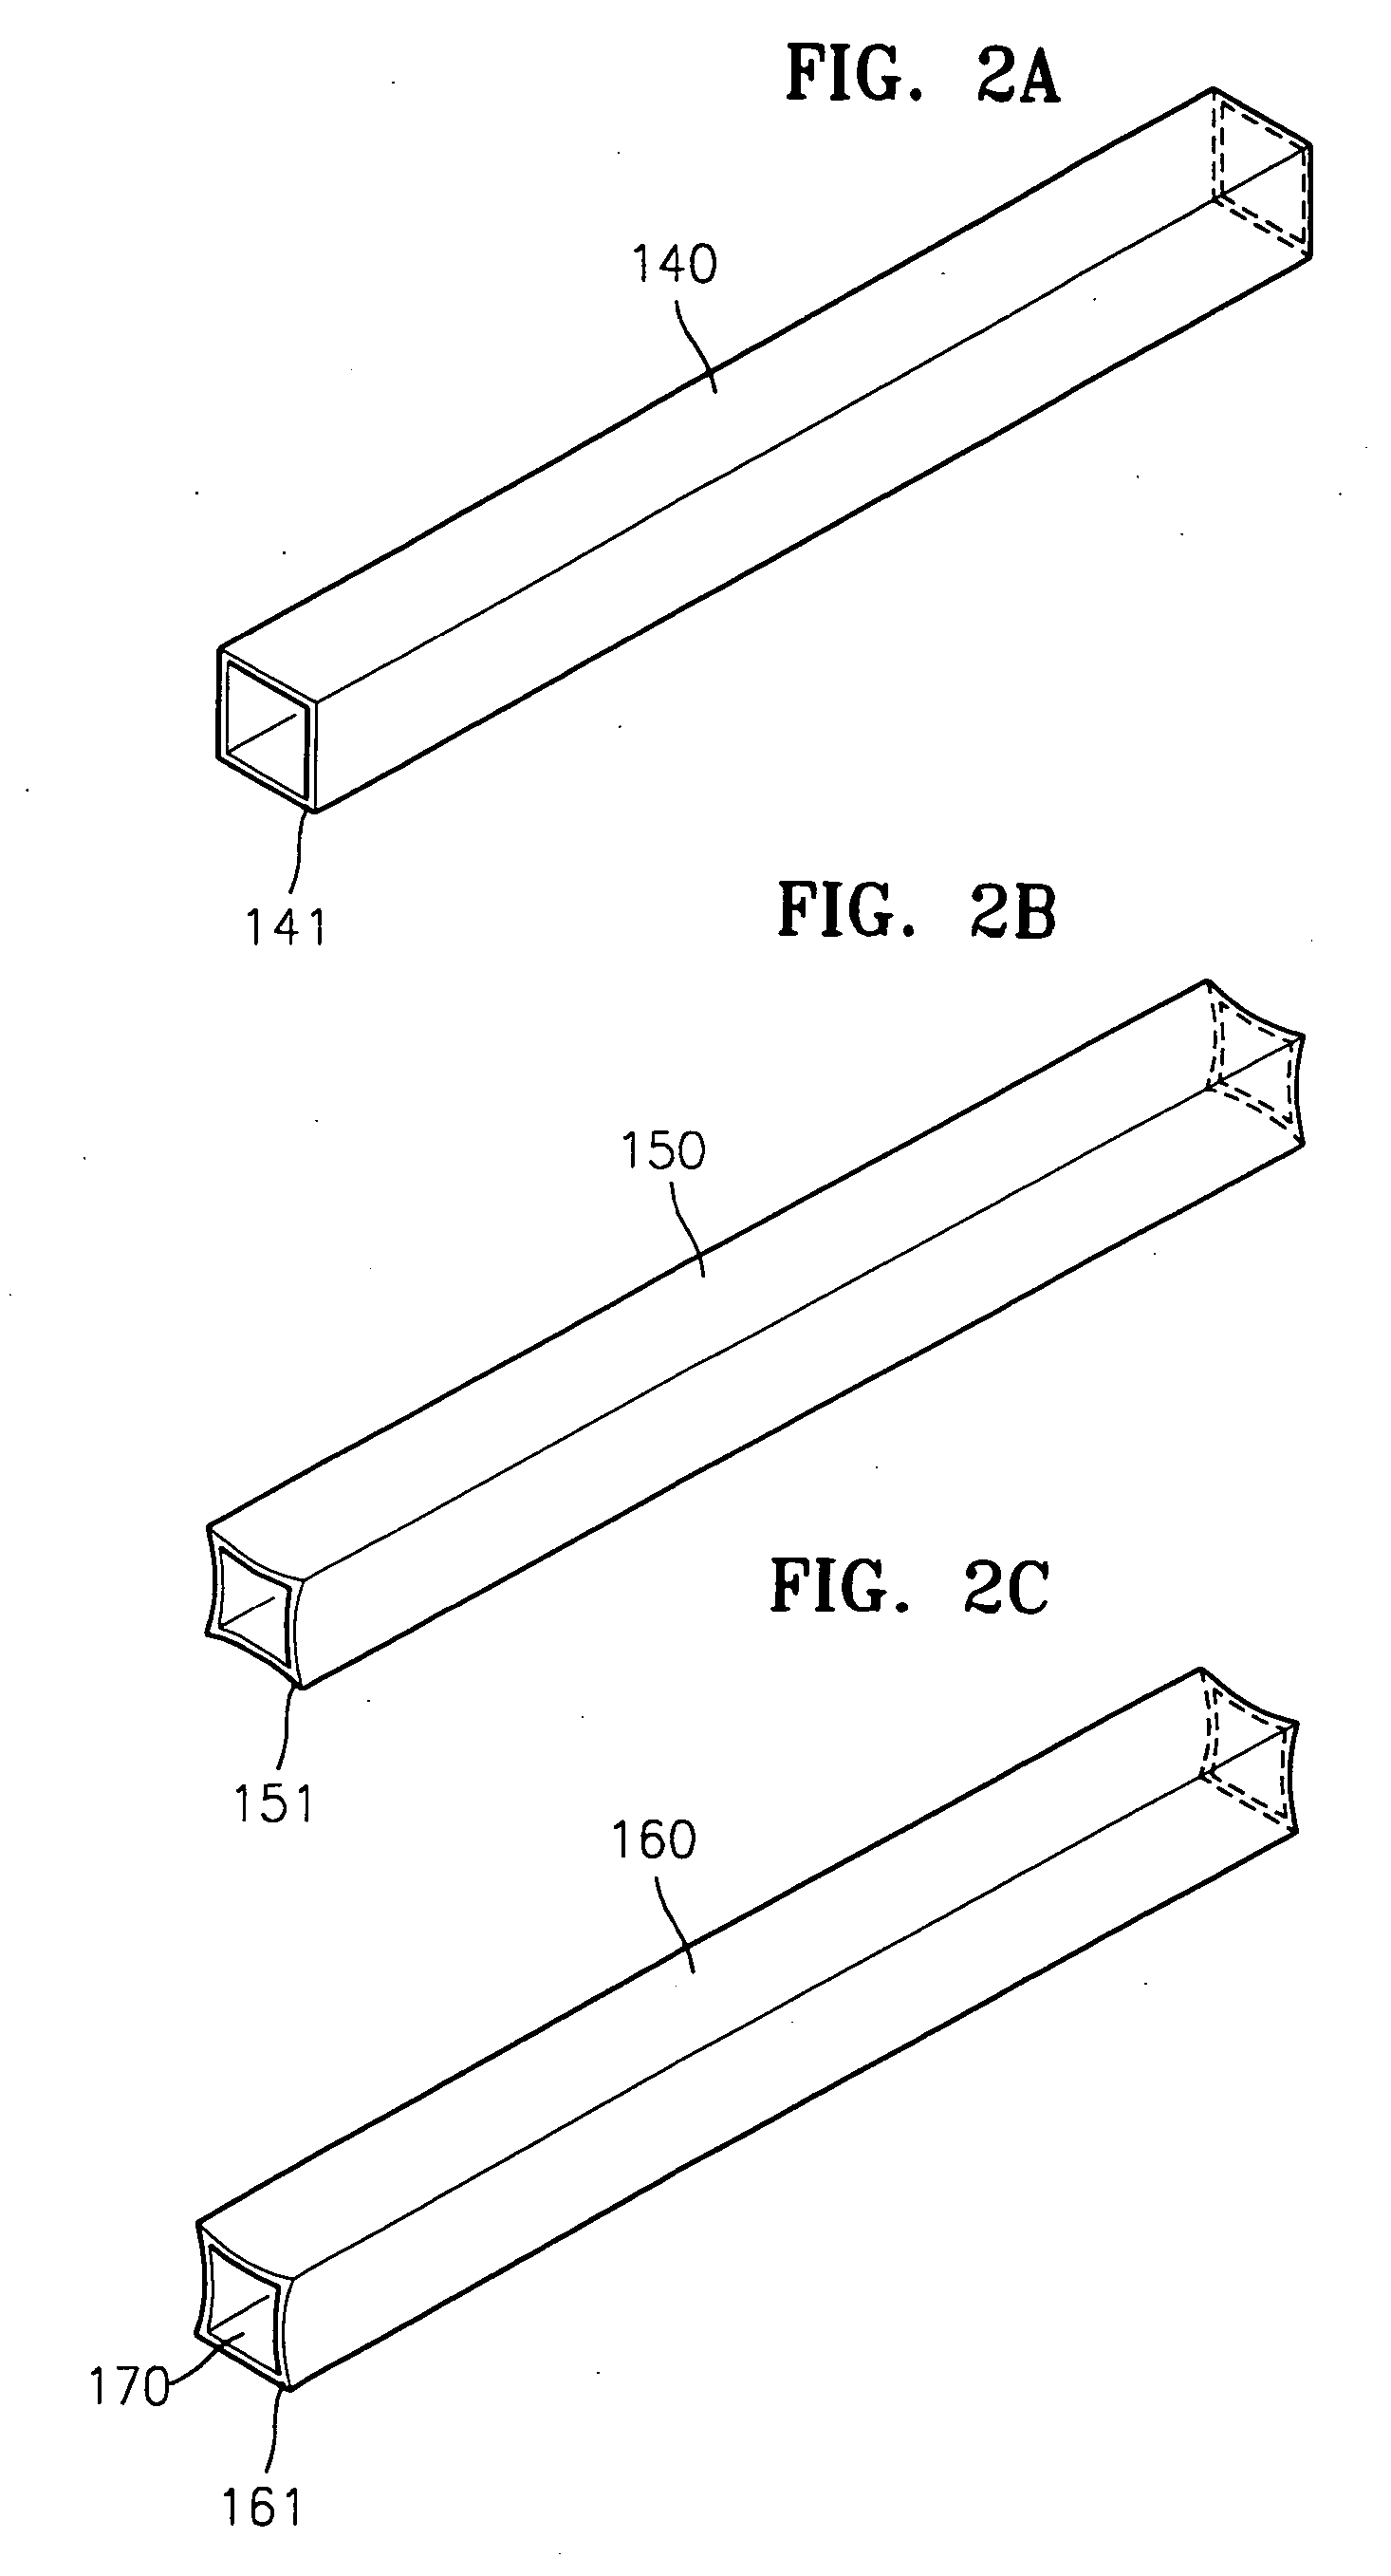 Micro heat pipe with poligonal cross-section manufactured via extrusion or drawing